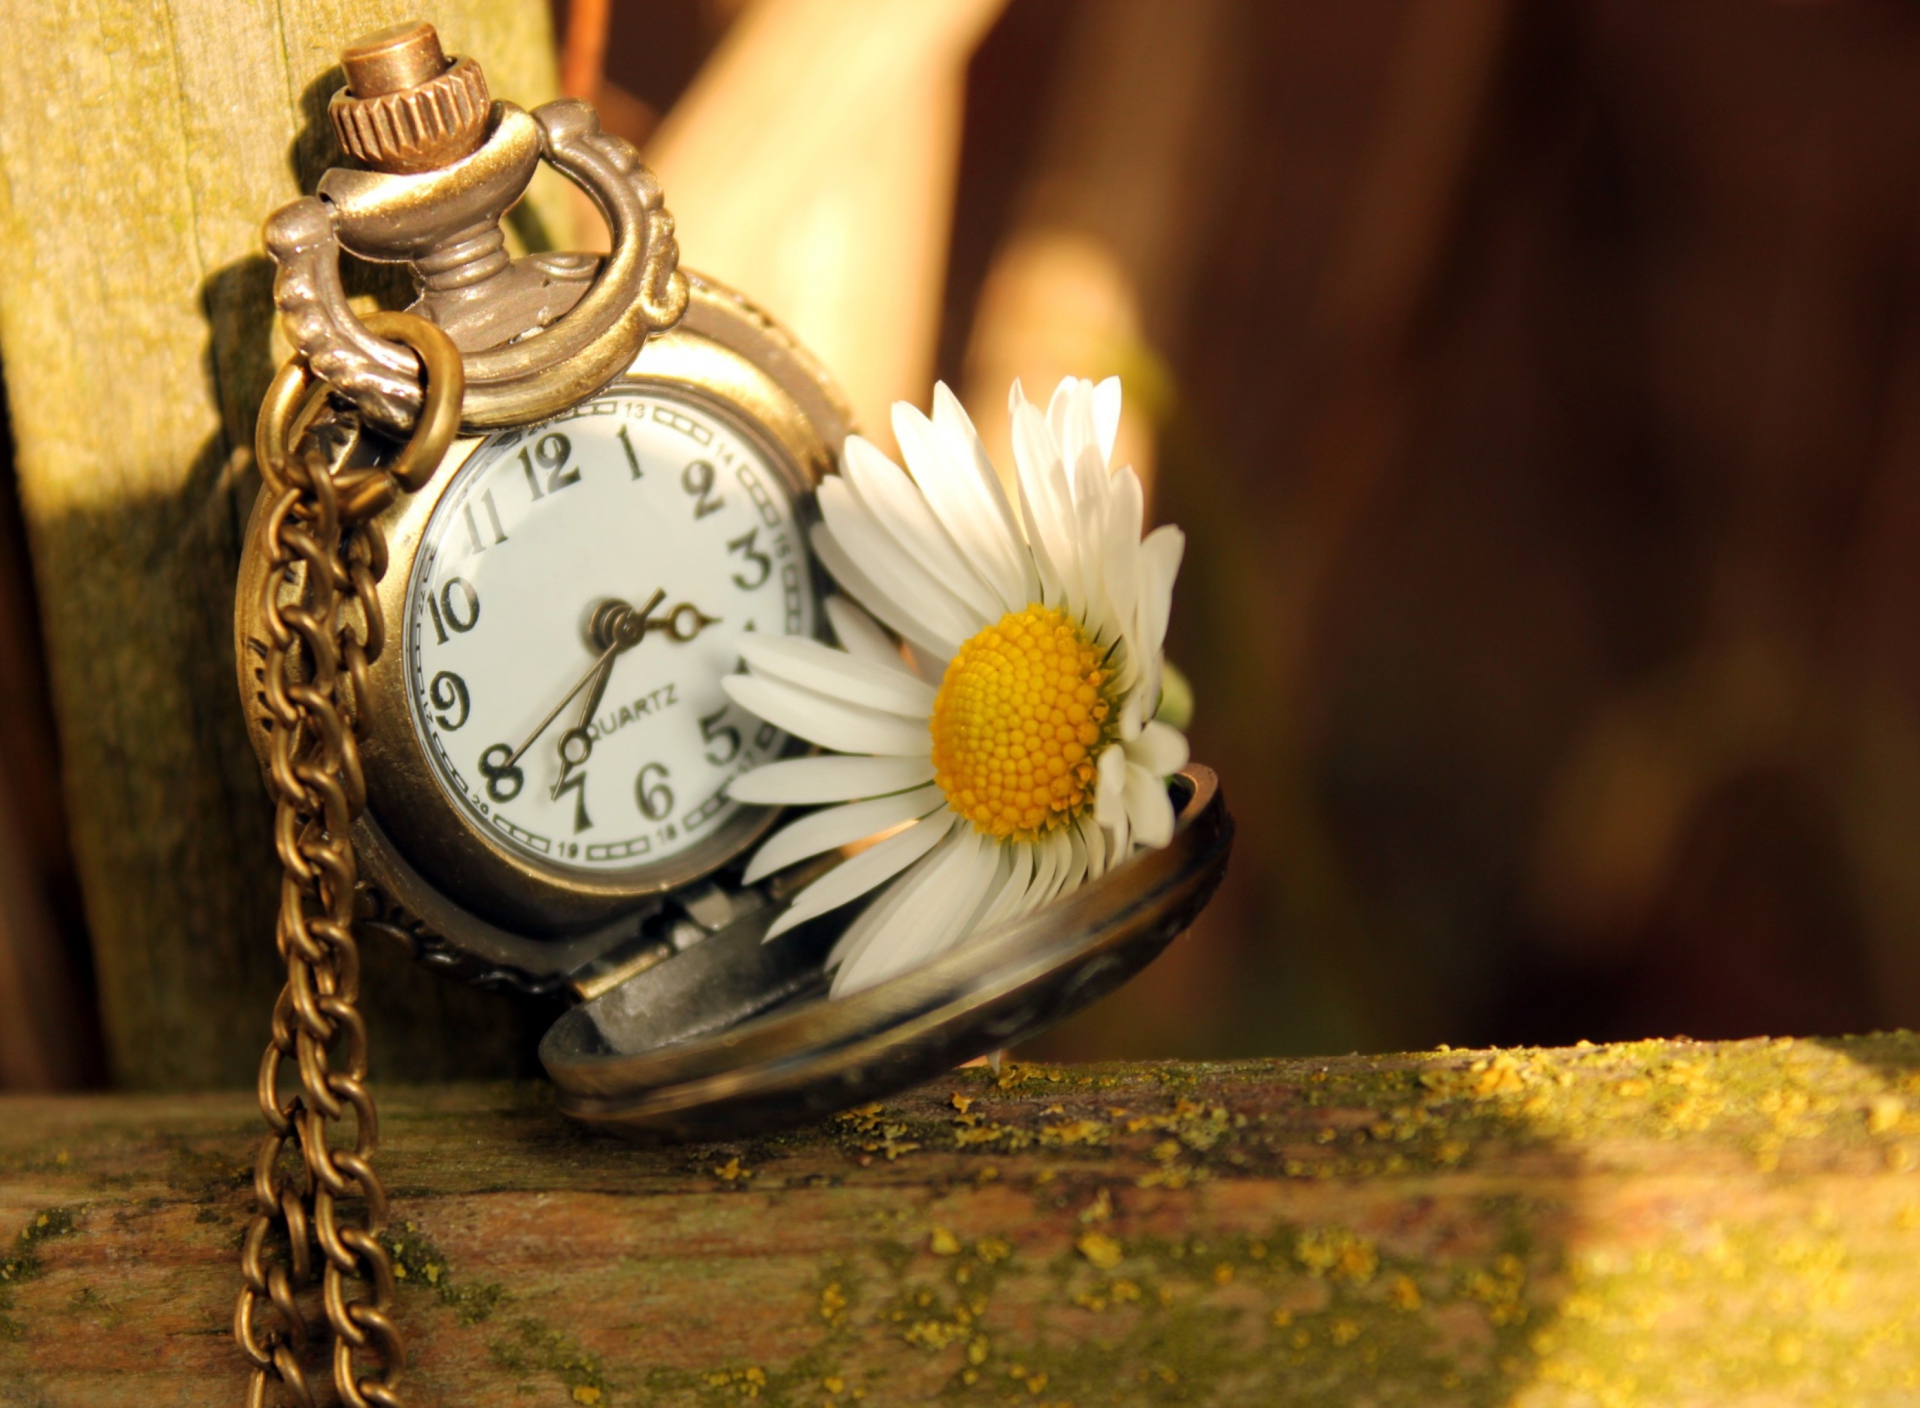 Vintage Watch And Daisy screenshot #1 1920x1408